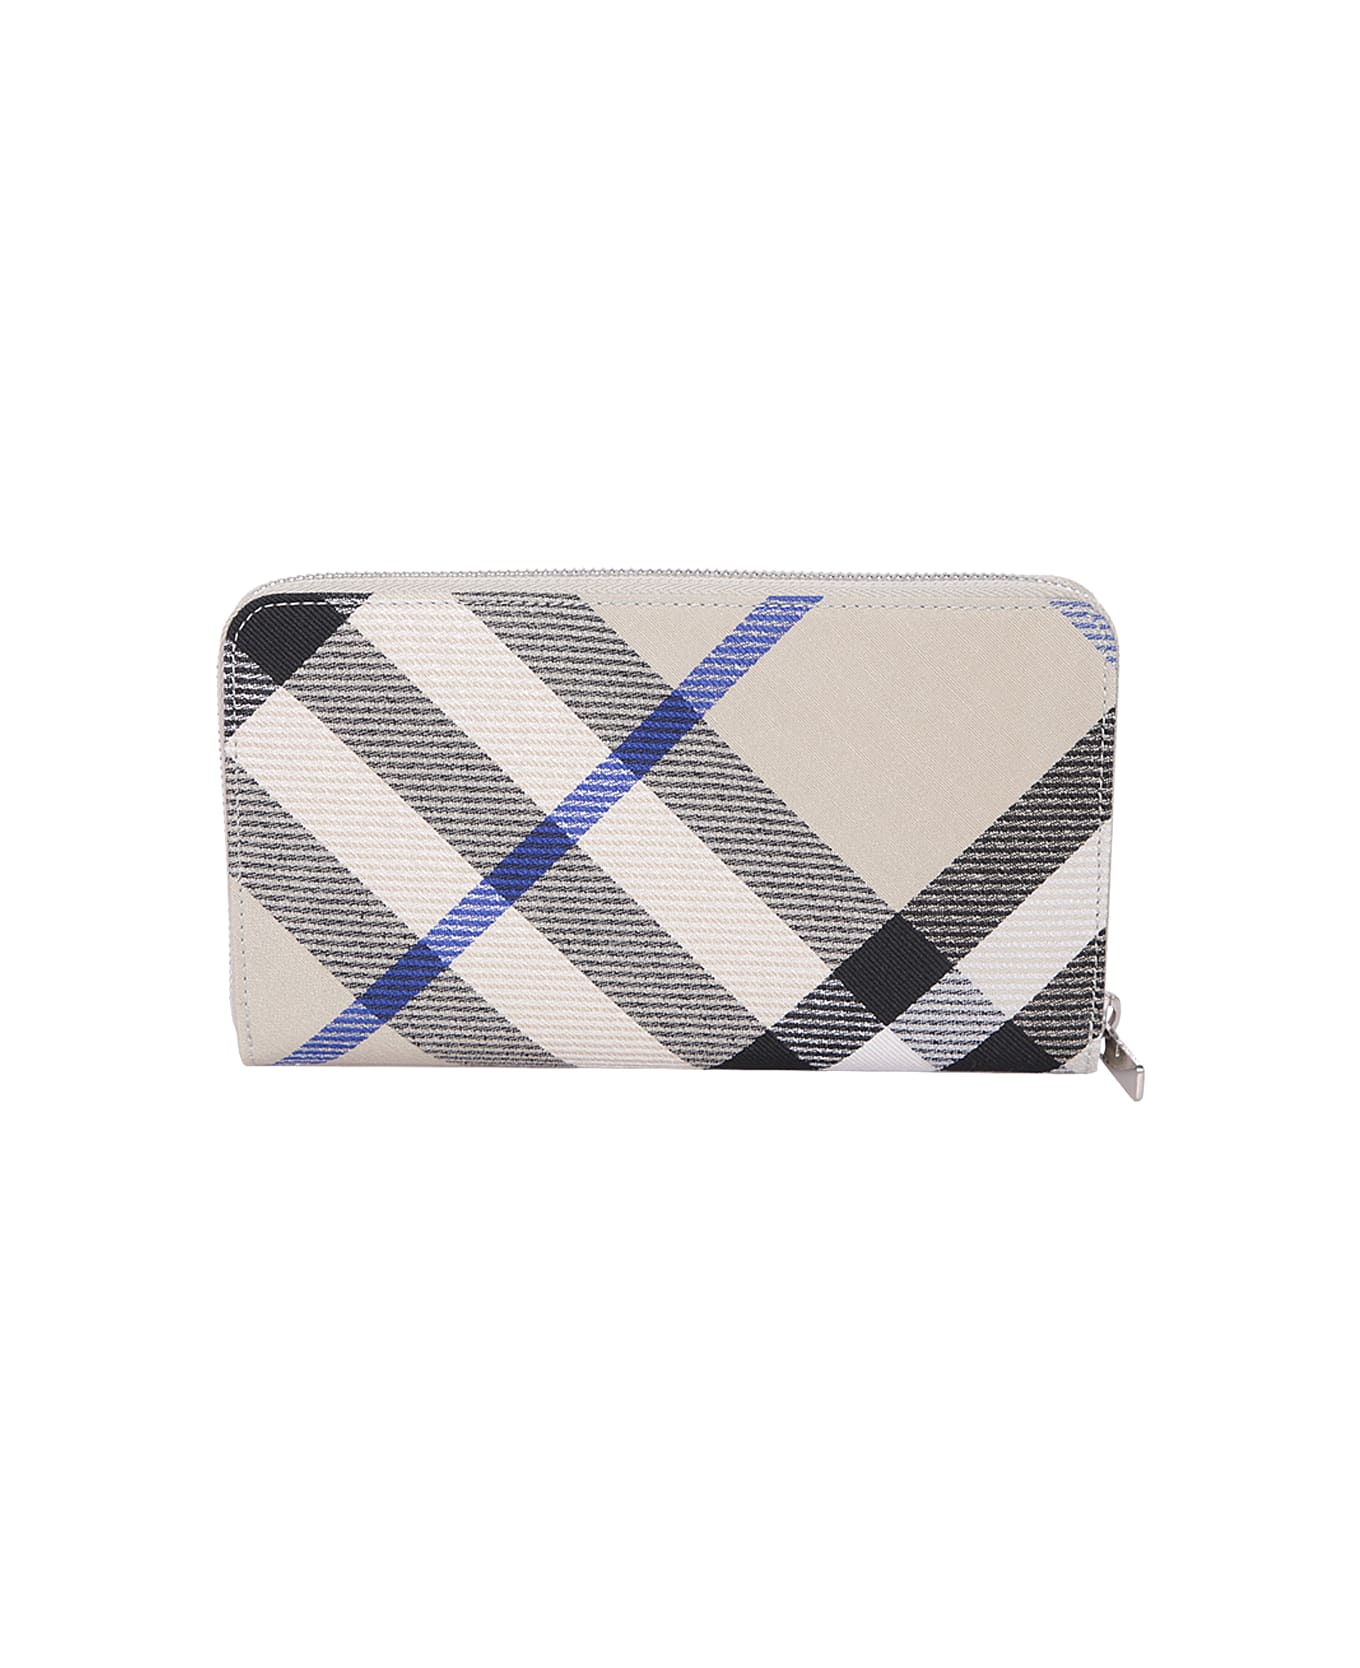 Burberry Large Checked Zip-around Wallet - White